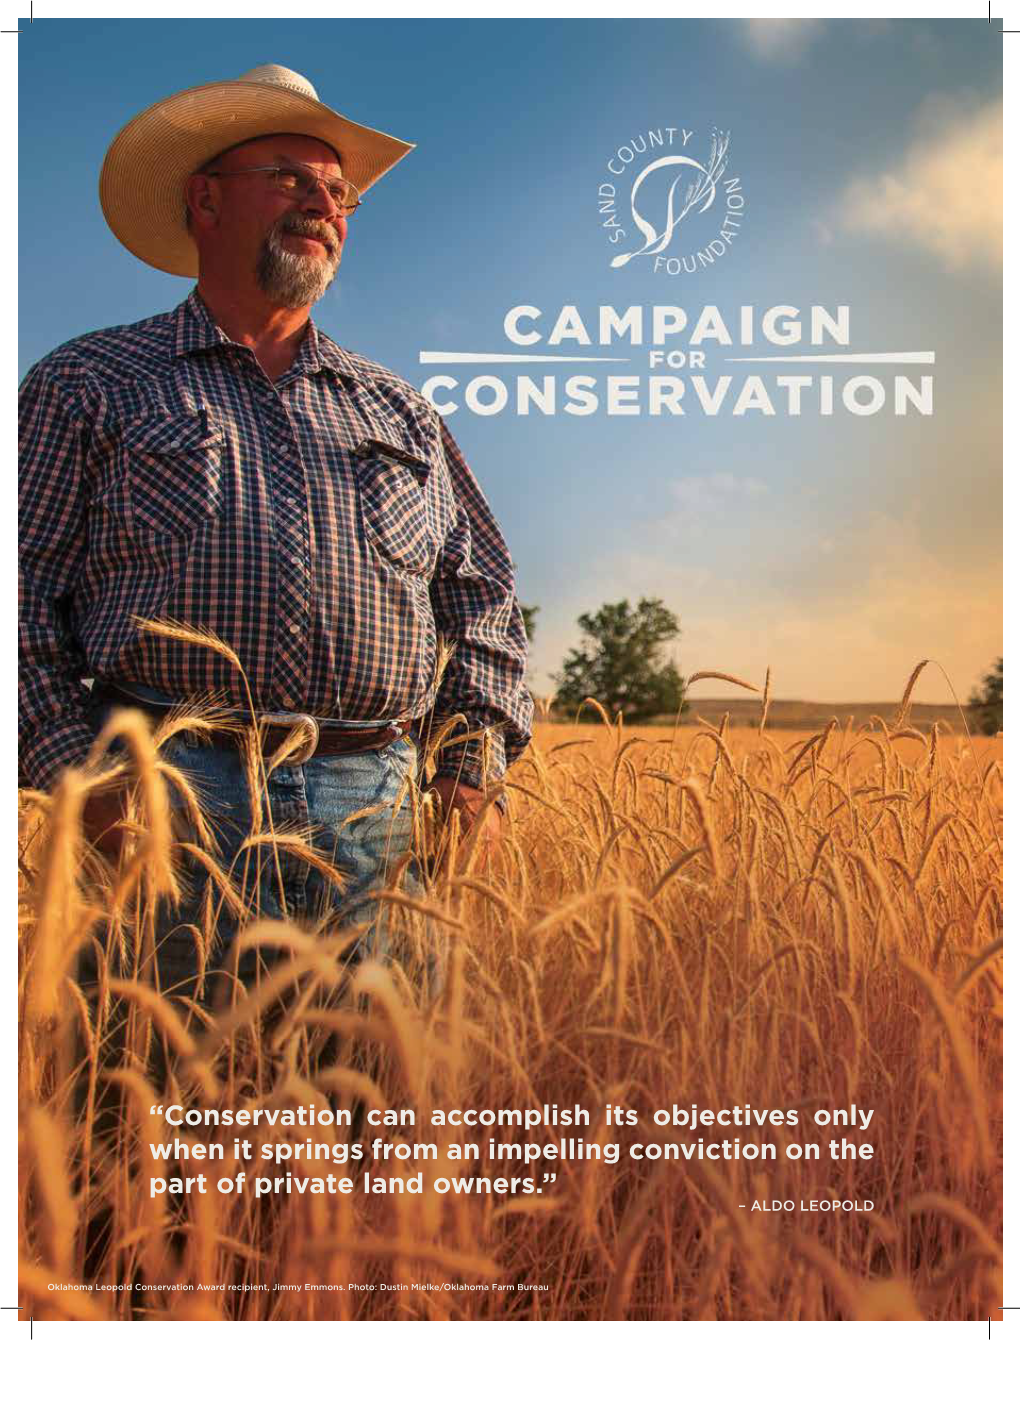 Read More About Our Campaign for Conservation Here